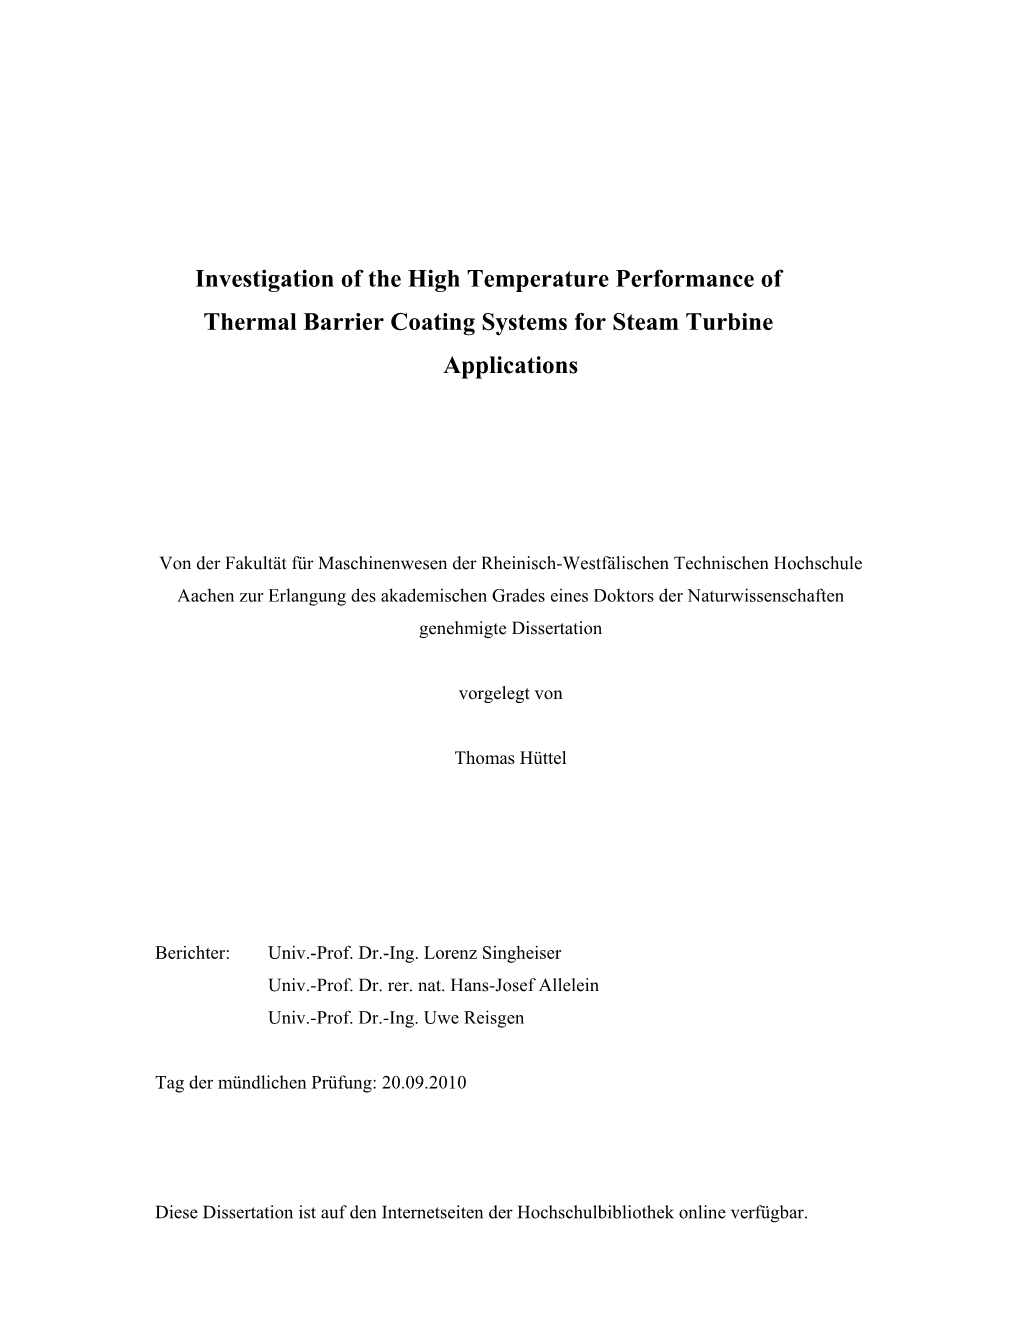 Investigation of the High Temperature Performance of Thermal Barrier Coating Systems for Steam Turbine